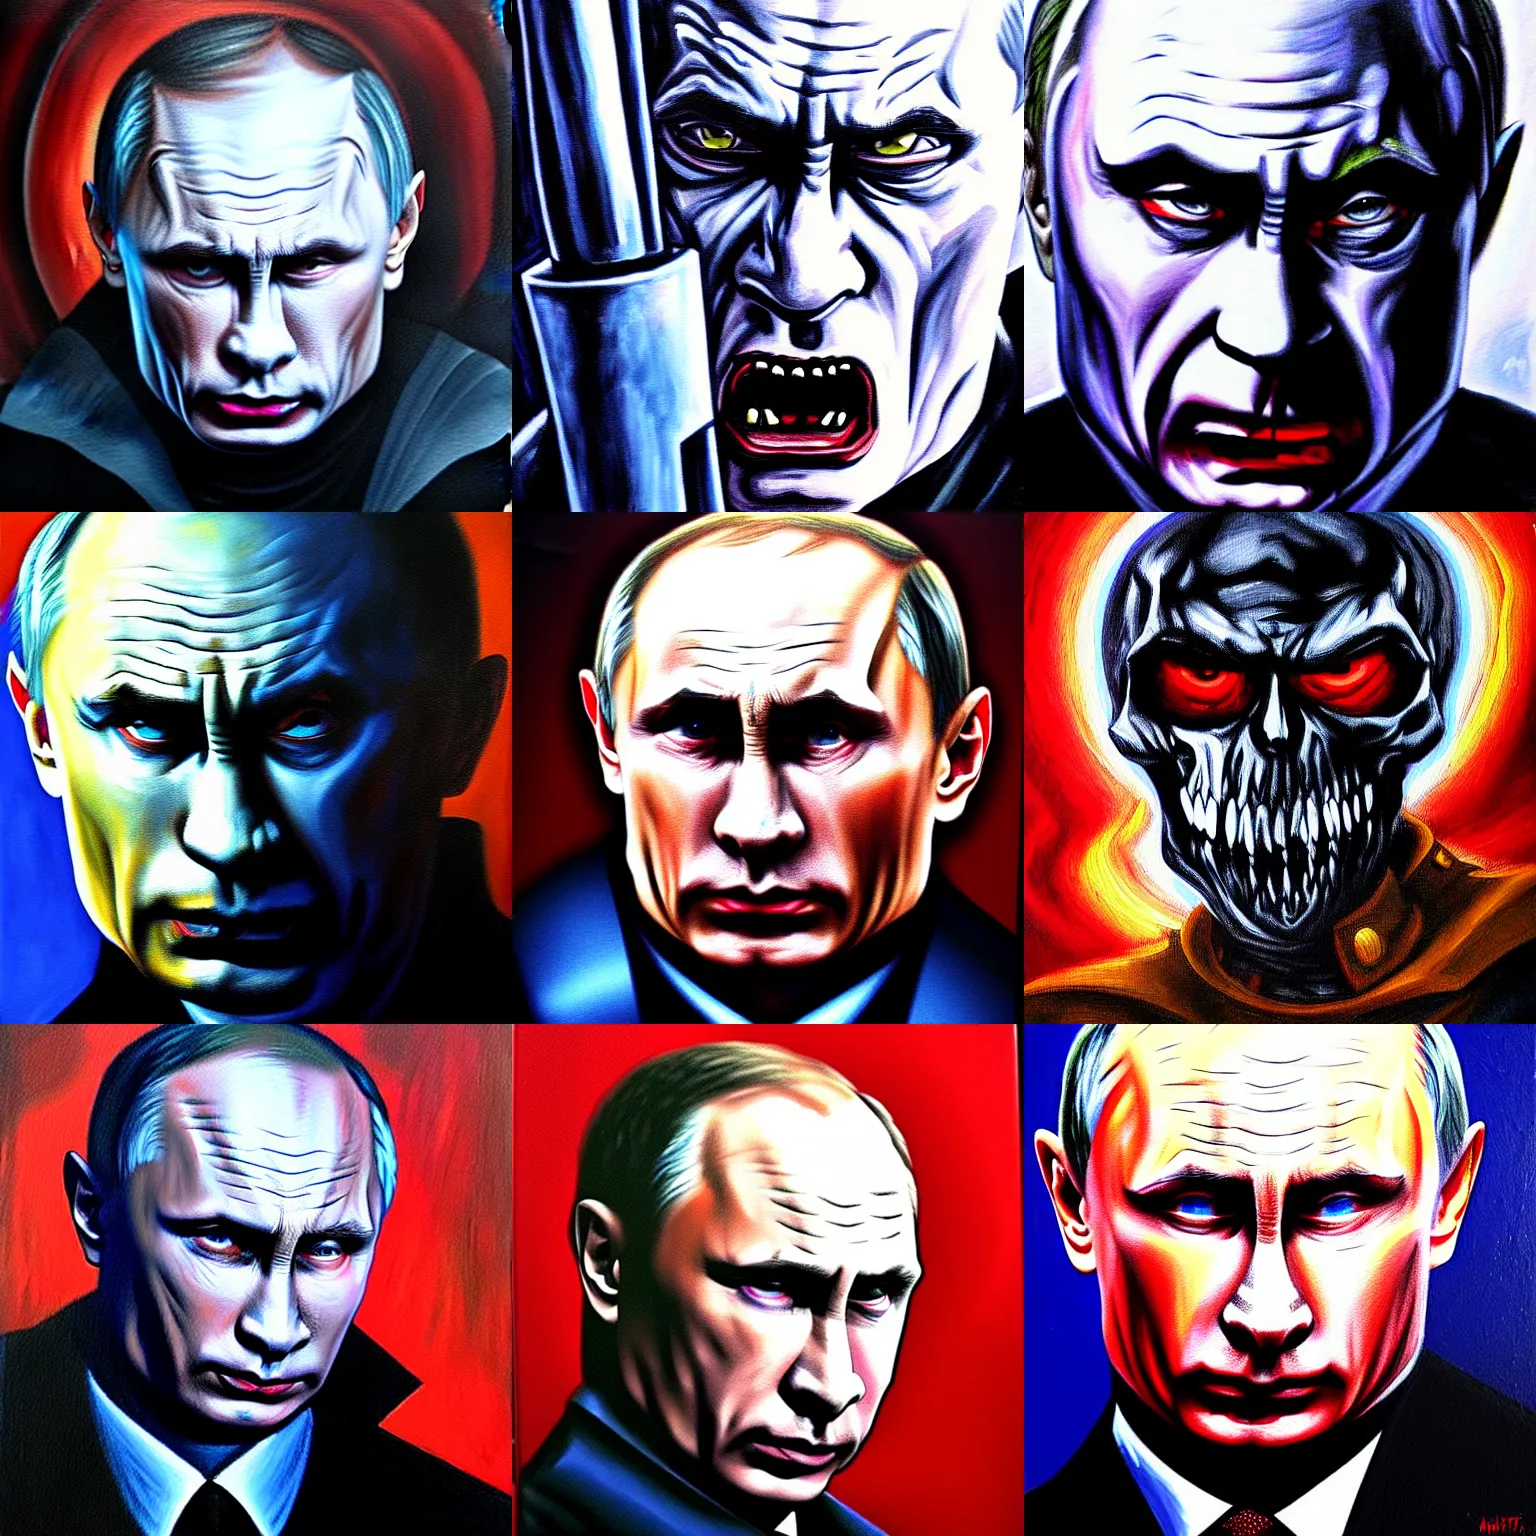 Prompt: angry vladimir putin as death dark mythical character. detailed painting